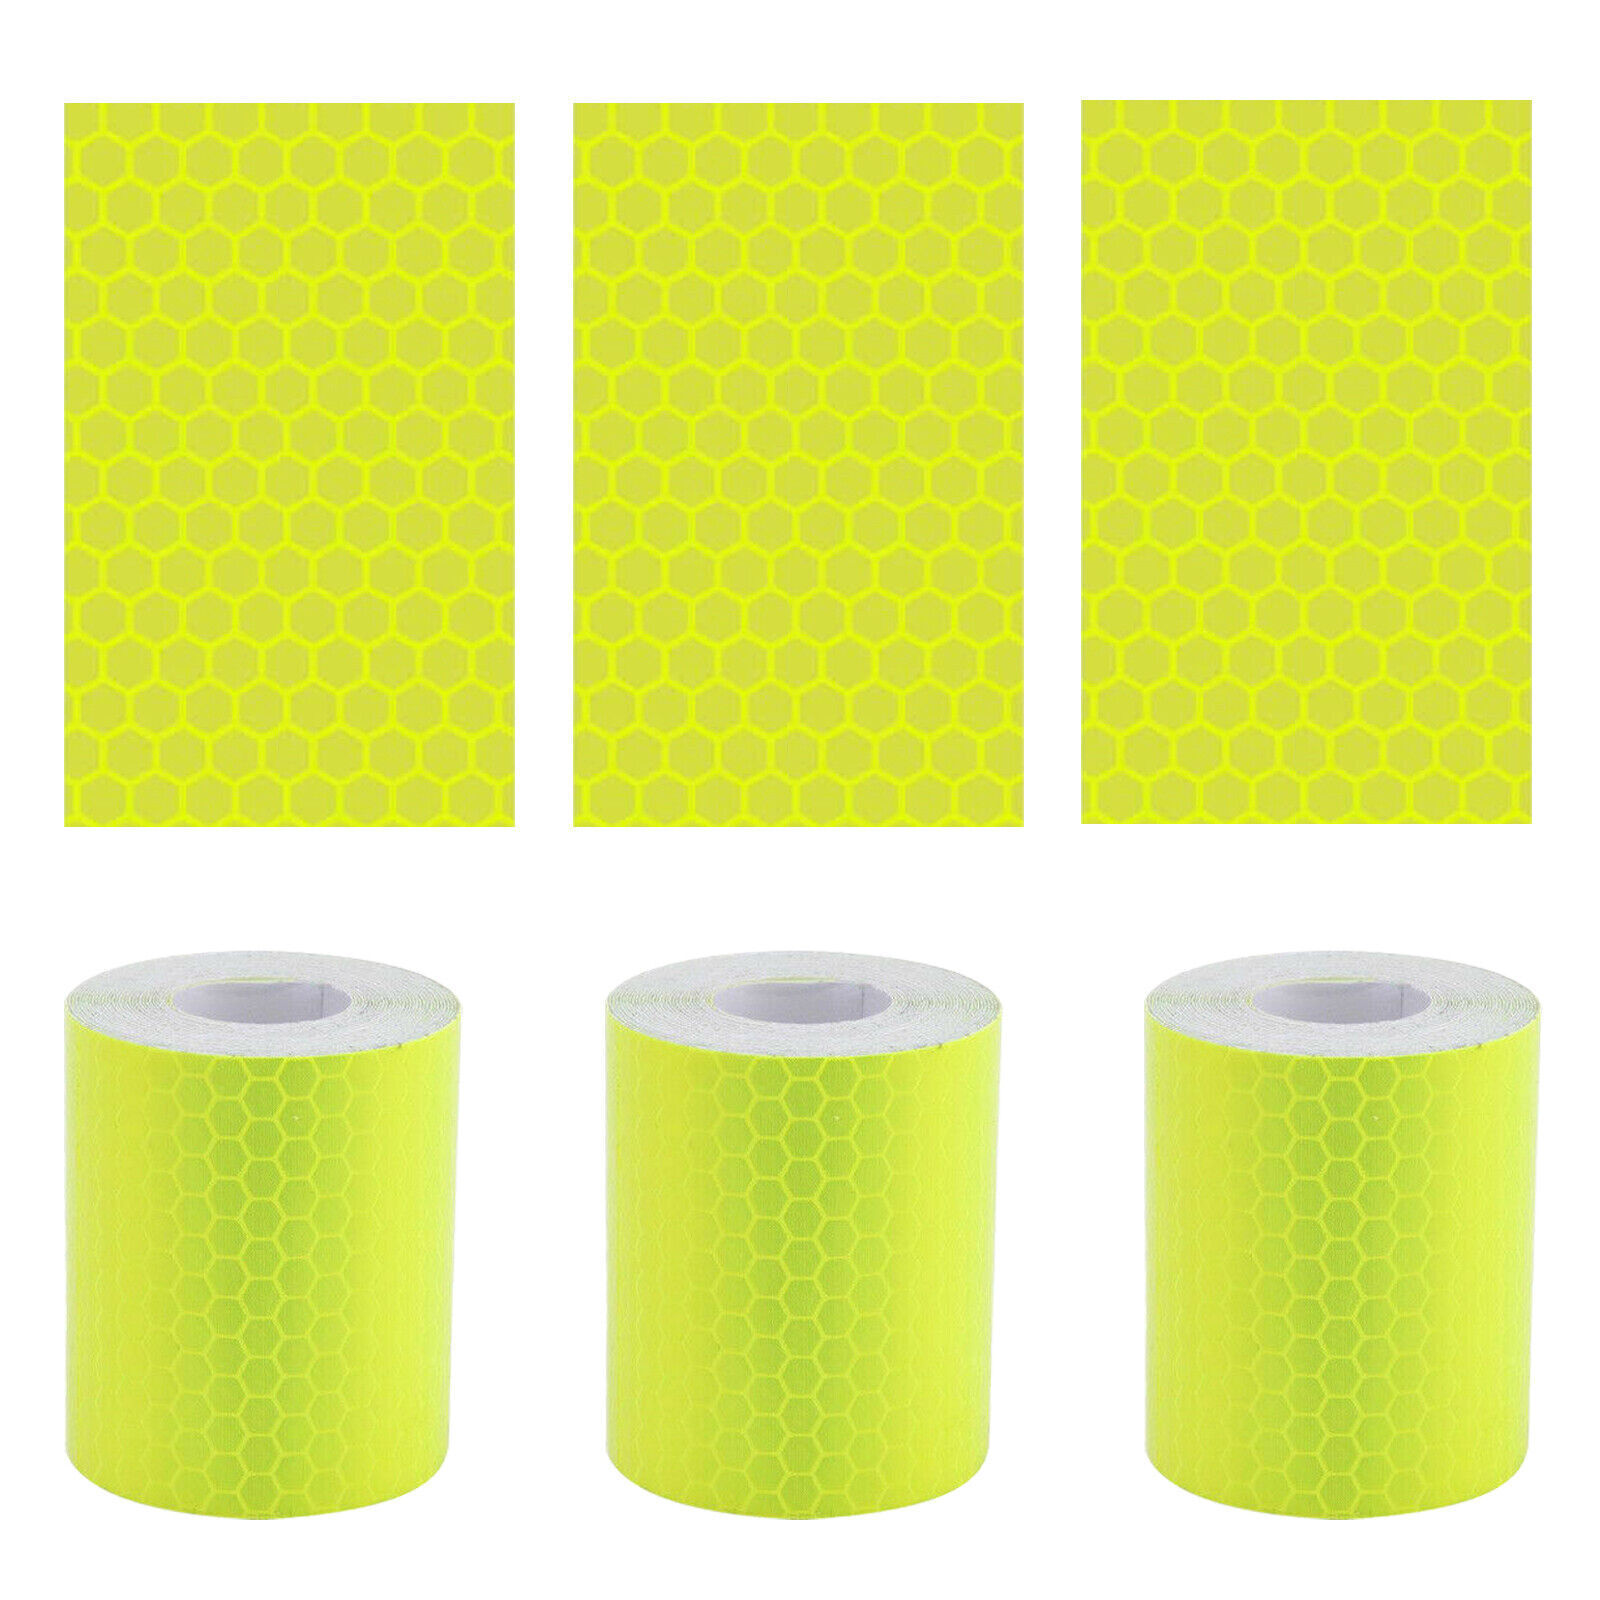 2pcs 10ft Car High Warning Tapes Reflective Stickers Safety for Auto Truck Boat